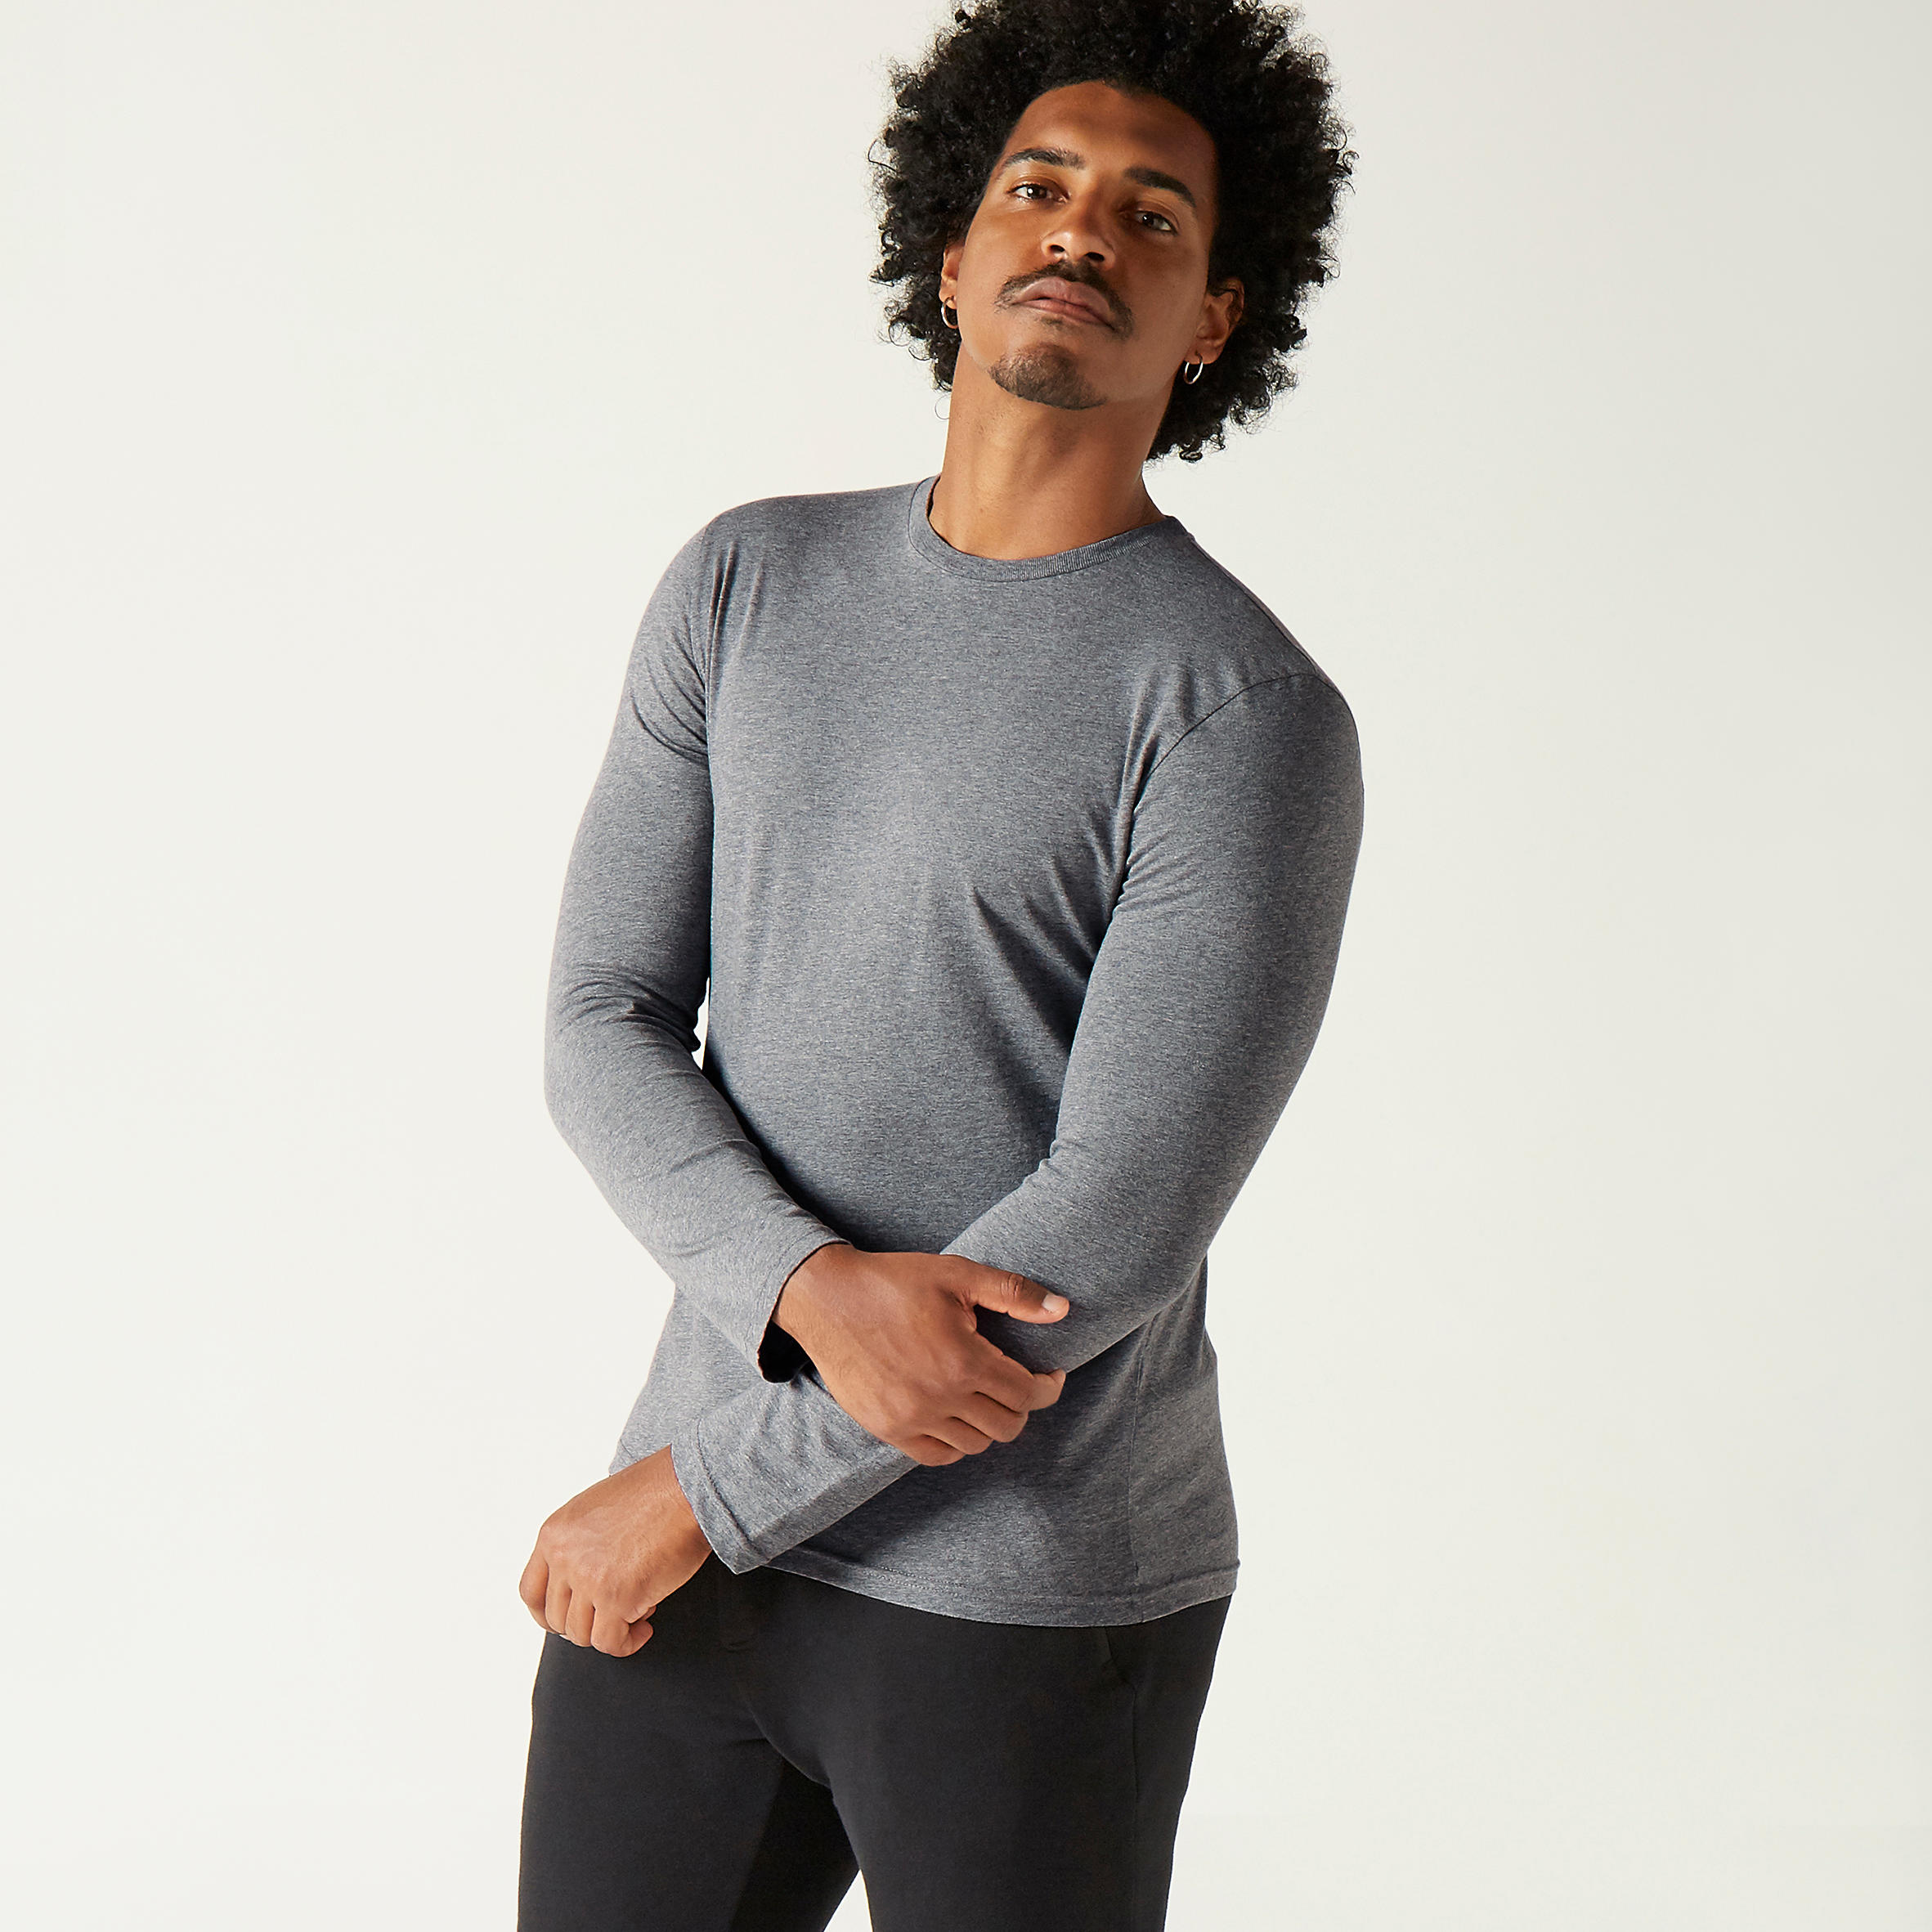 DOMYOS Long-Sleeved Fitness Cotton T-Shirt - Mottled Grey